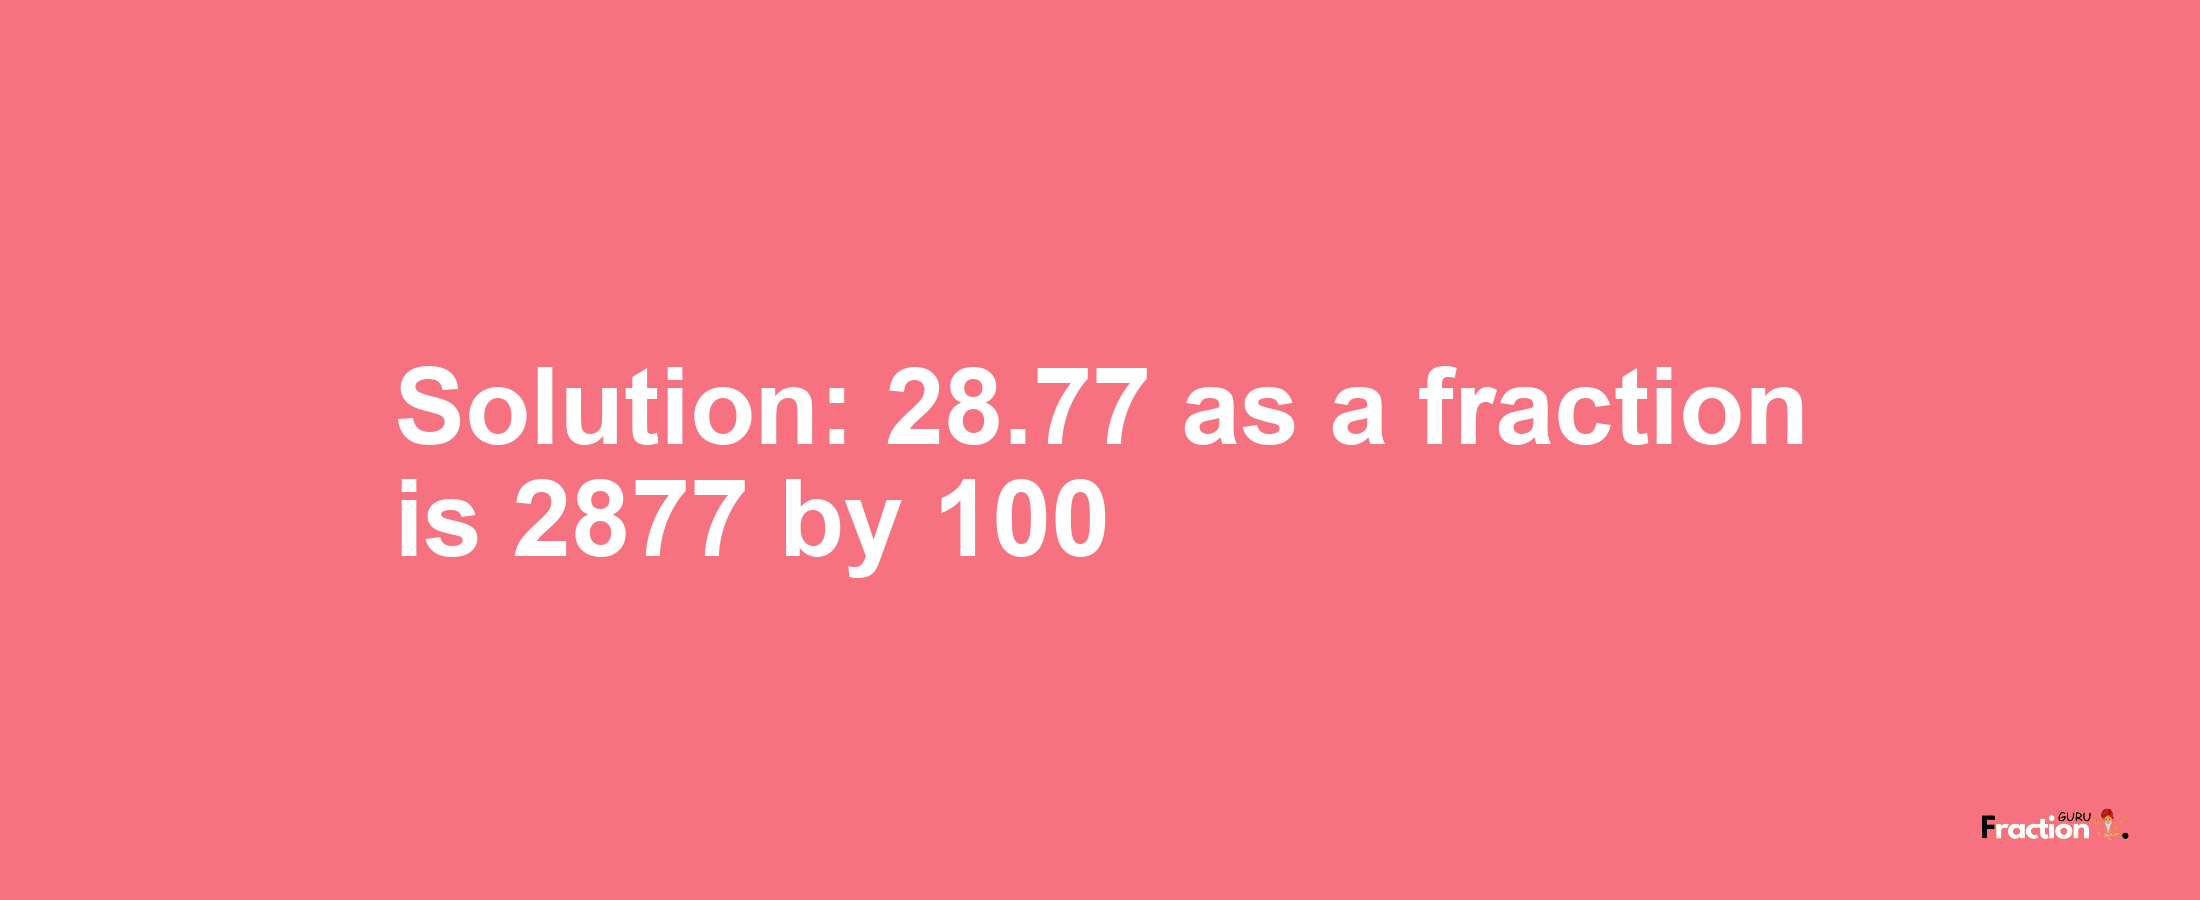 Solution:28.77 as a fraction is 2877/100